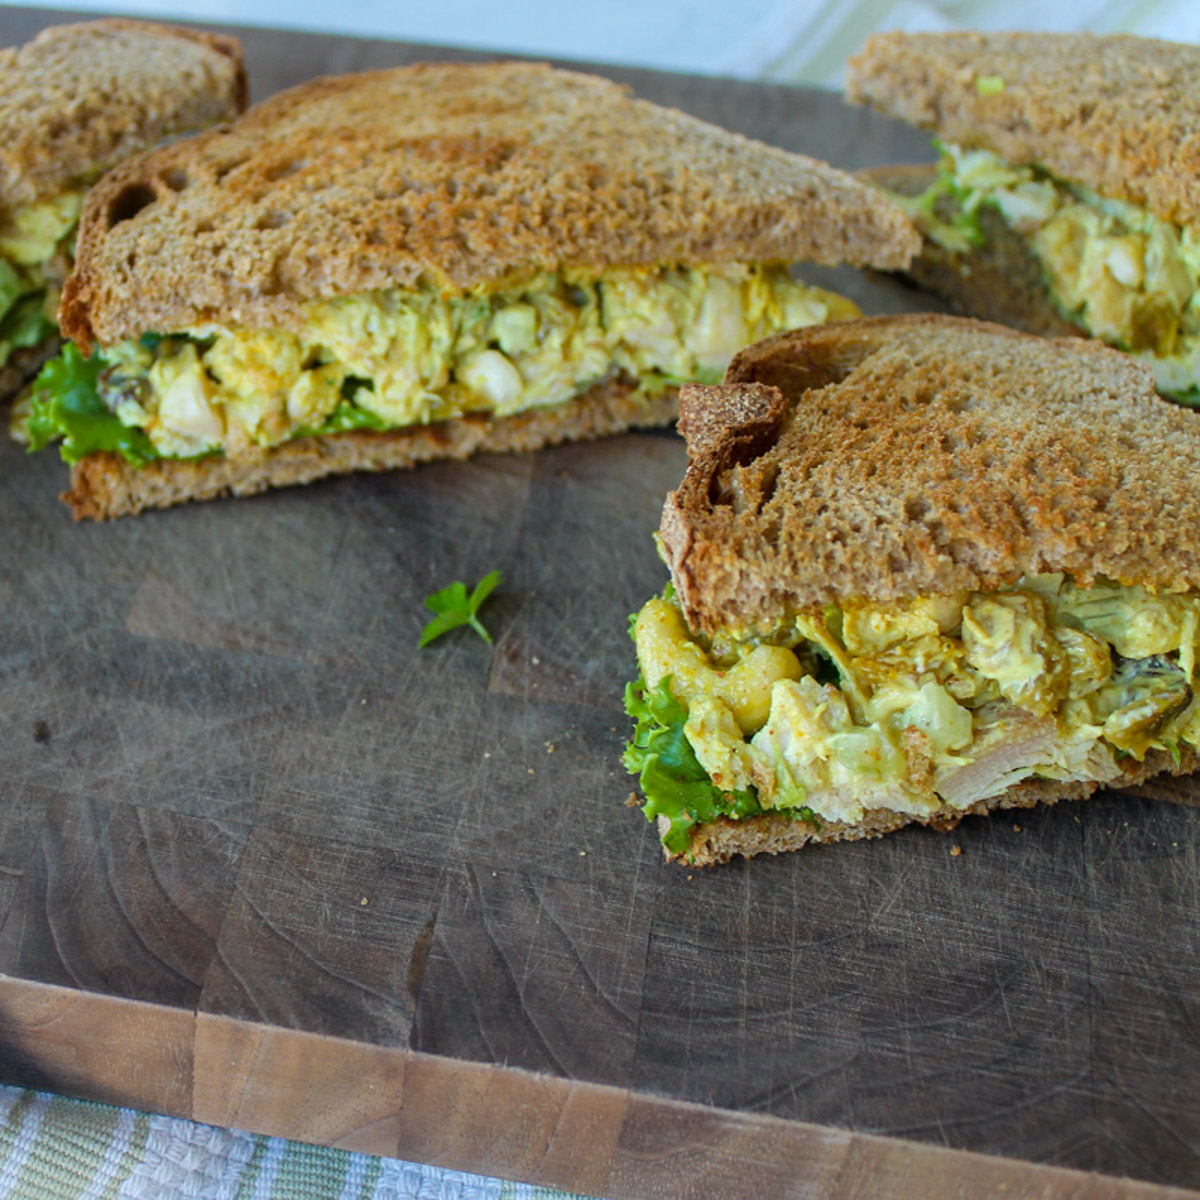 Curry Chicken Salad Sandwiches on wheat bread with lettuce, sliced on a cutting board.